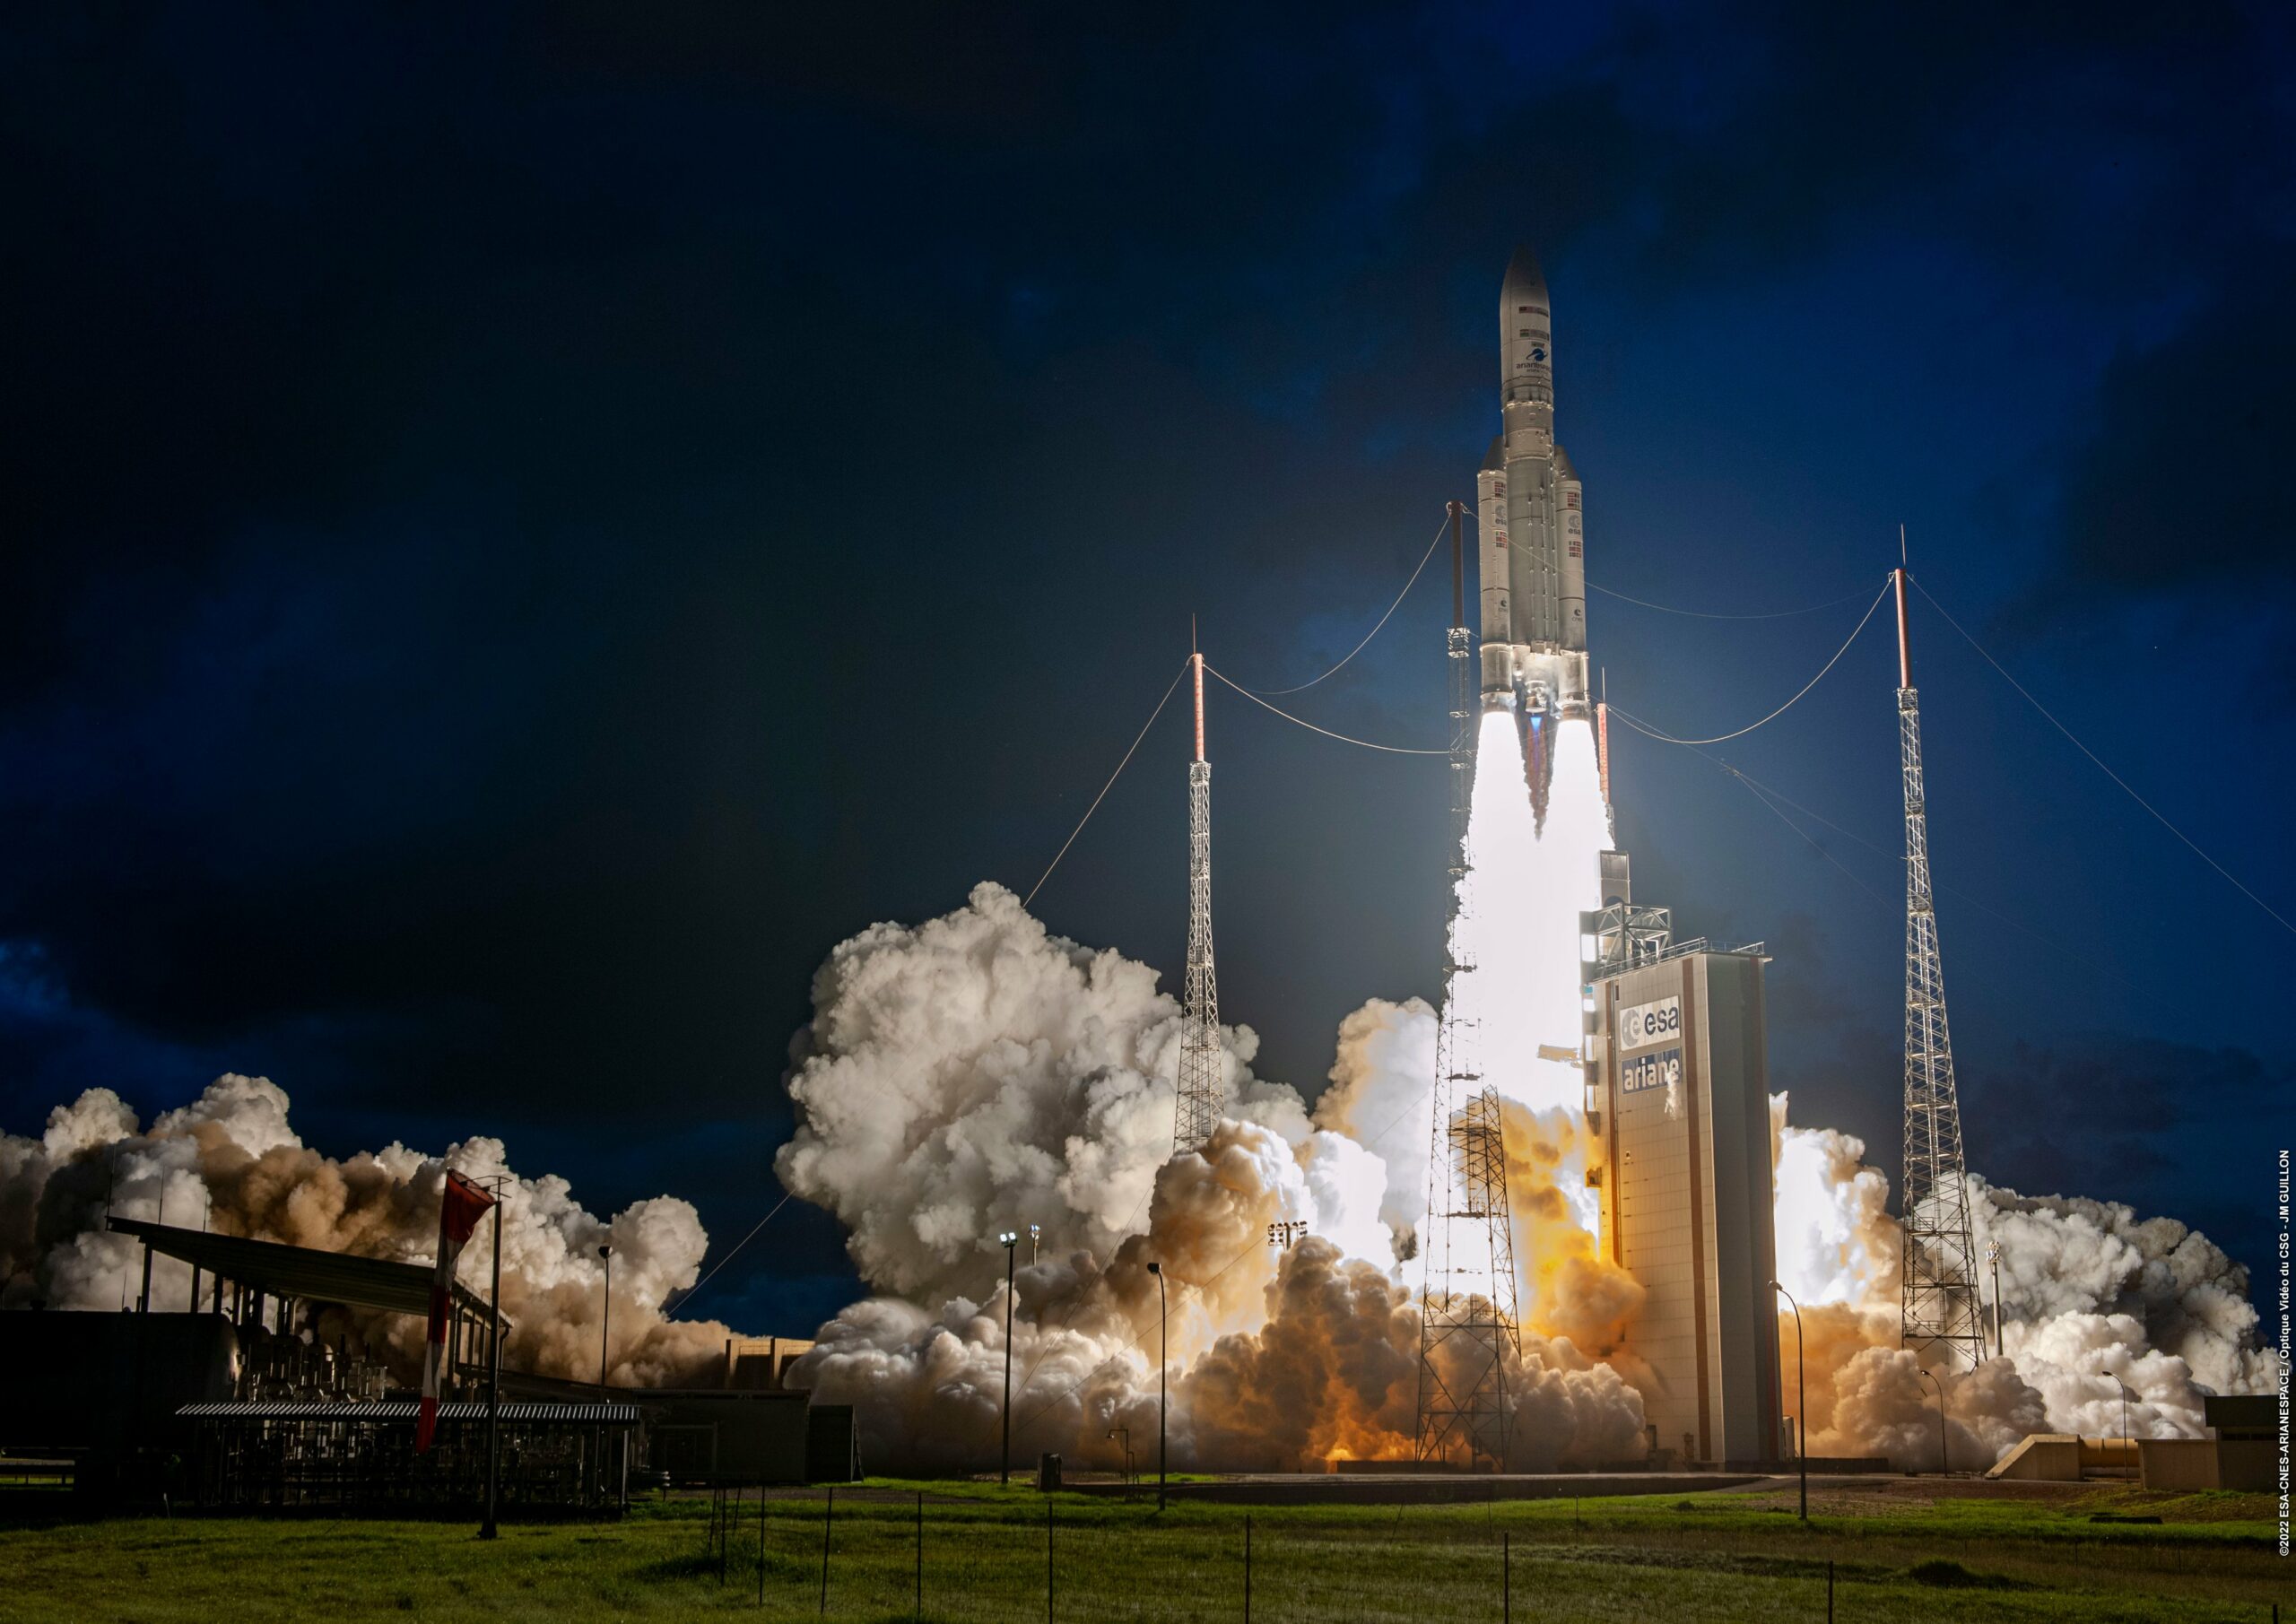 Germany invests in development of French Ariane 7 rocket to compete with SpaceX